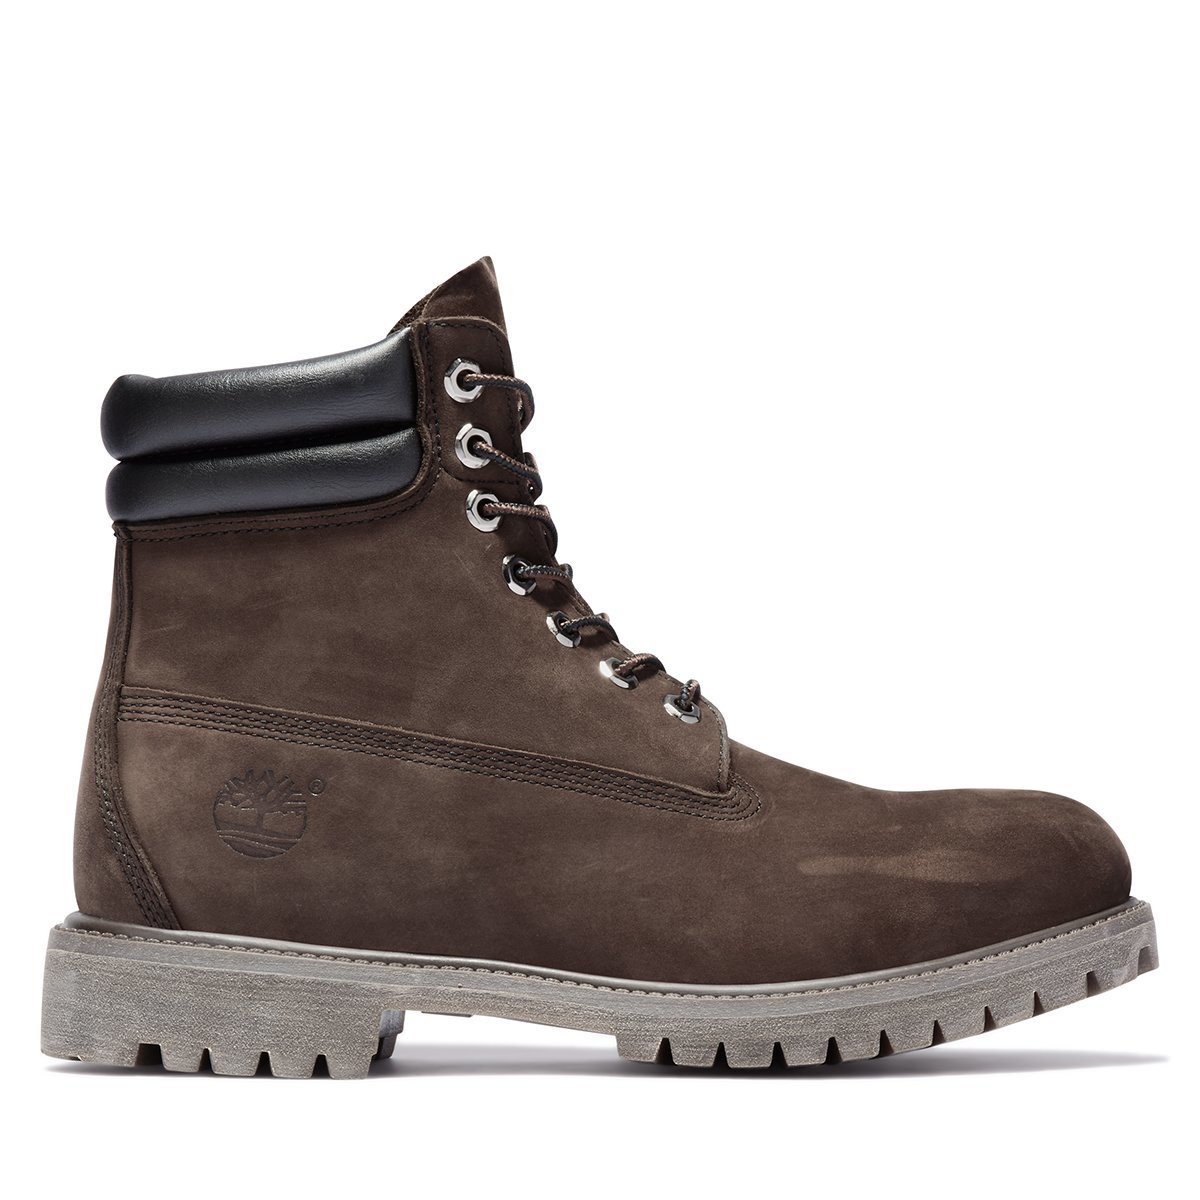 timberland back road hiking boot